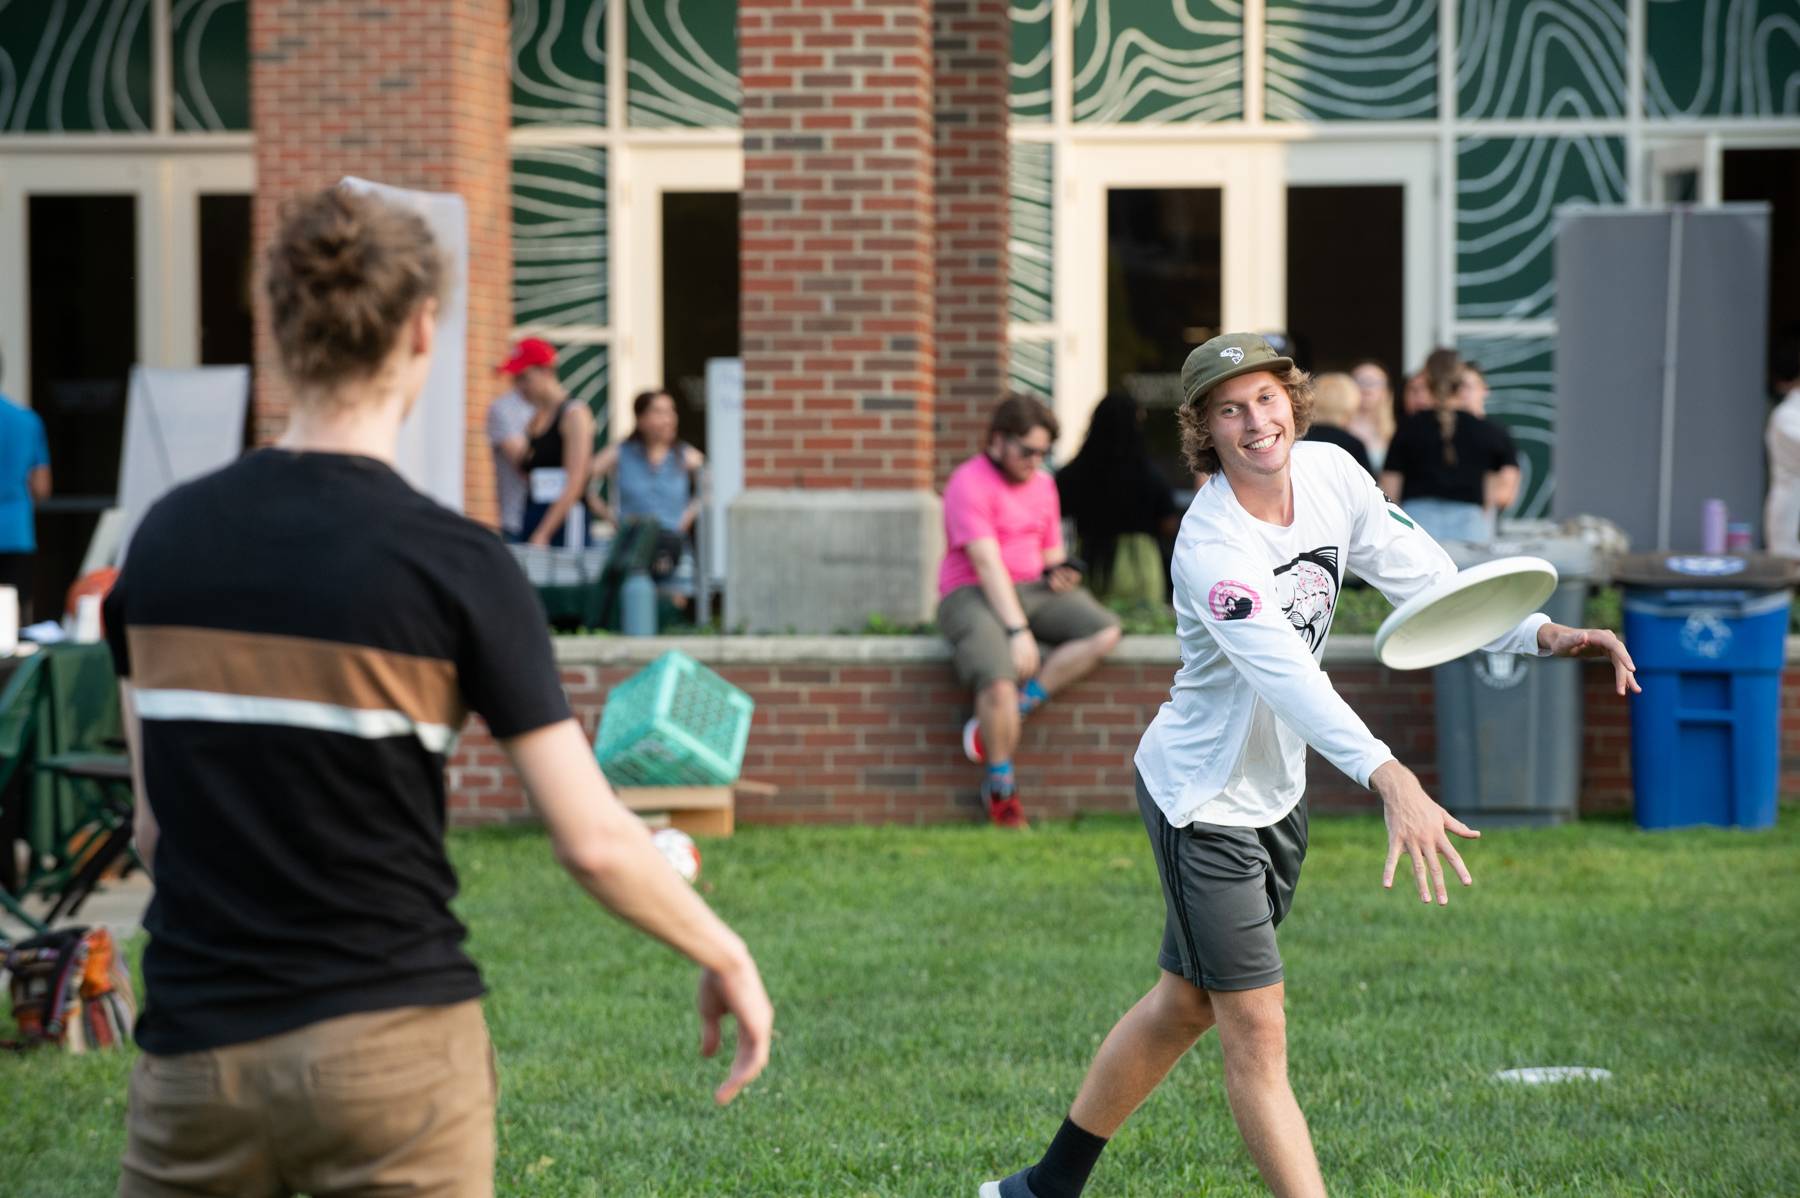 Students enjoy a game of Frisbee during Welcome Week